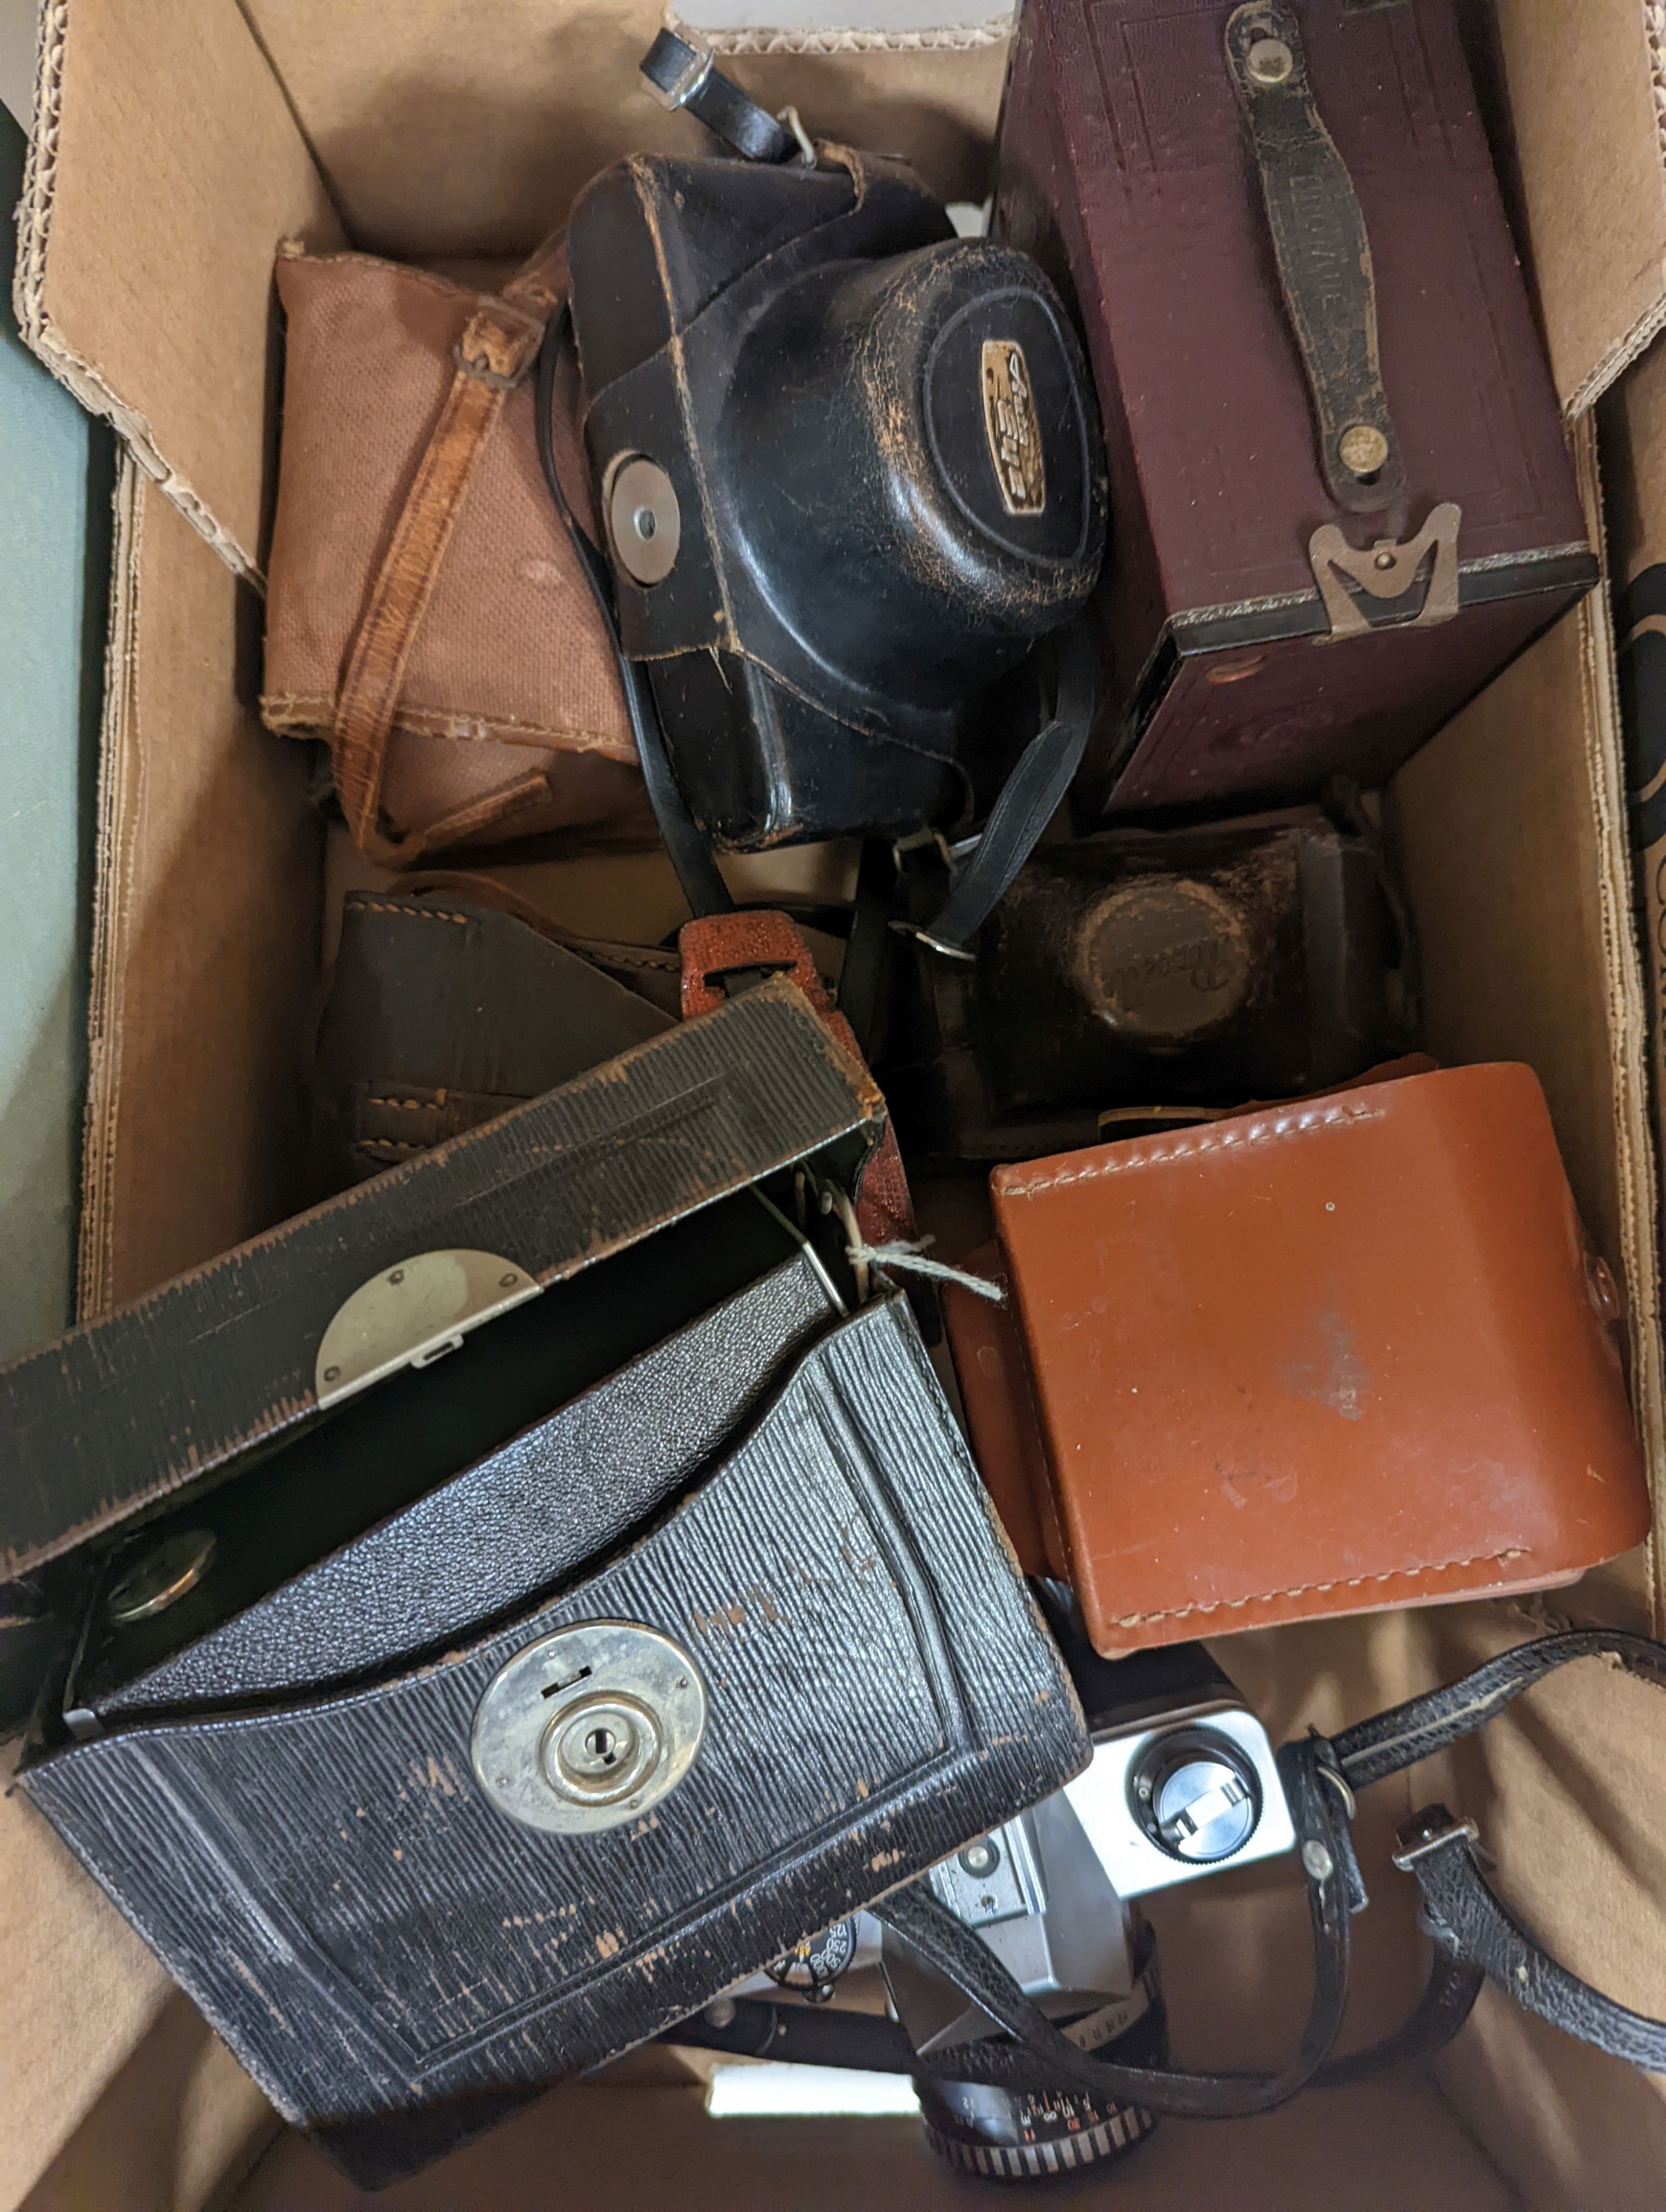 A Polyscop stereo camera together with other 20th century cameras